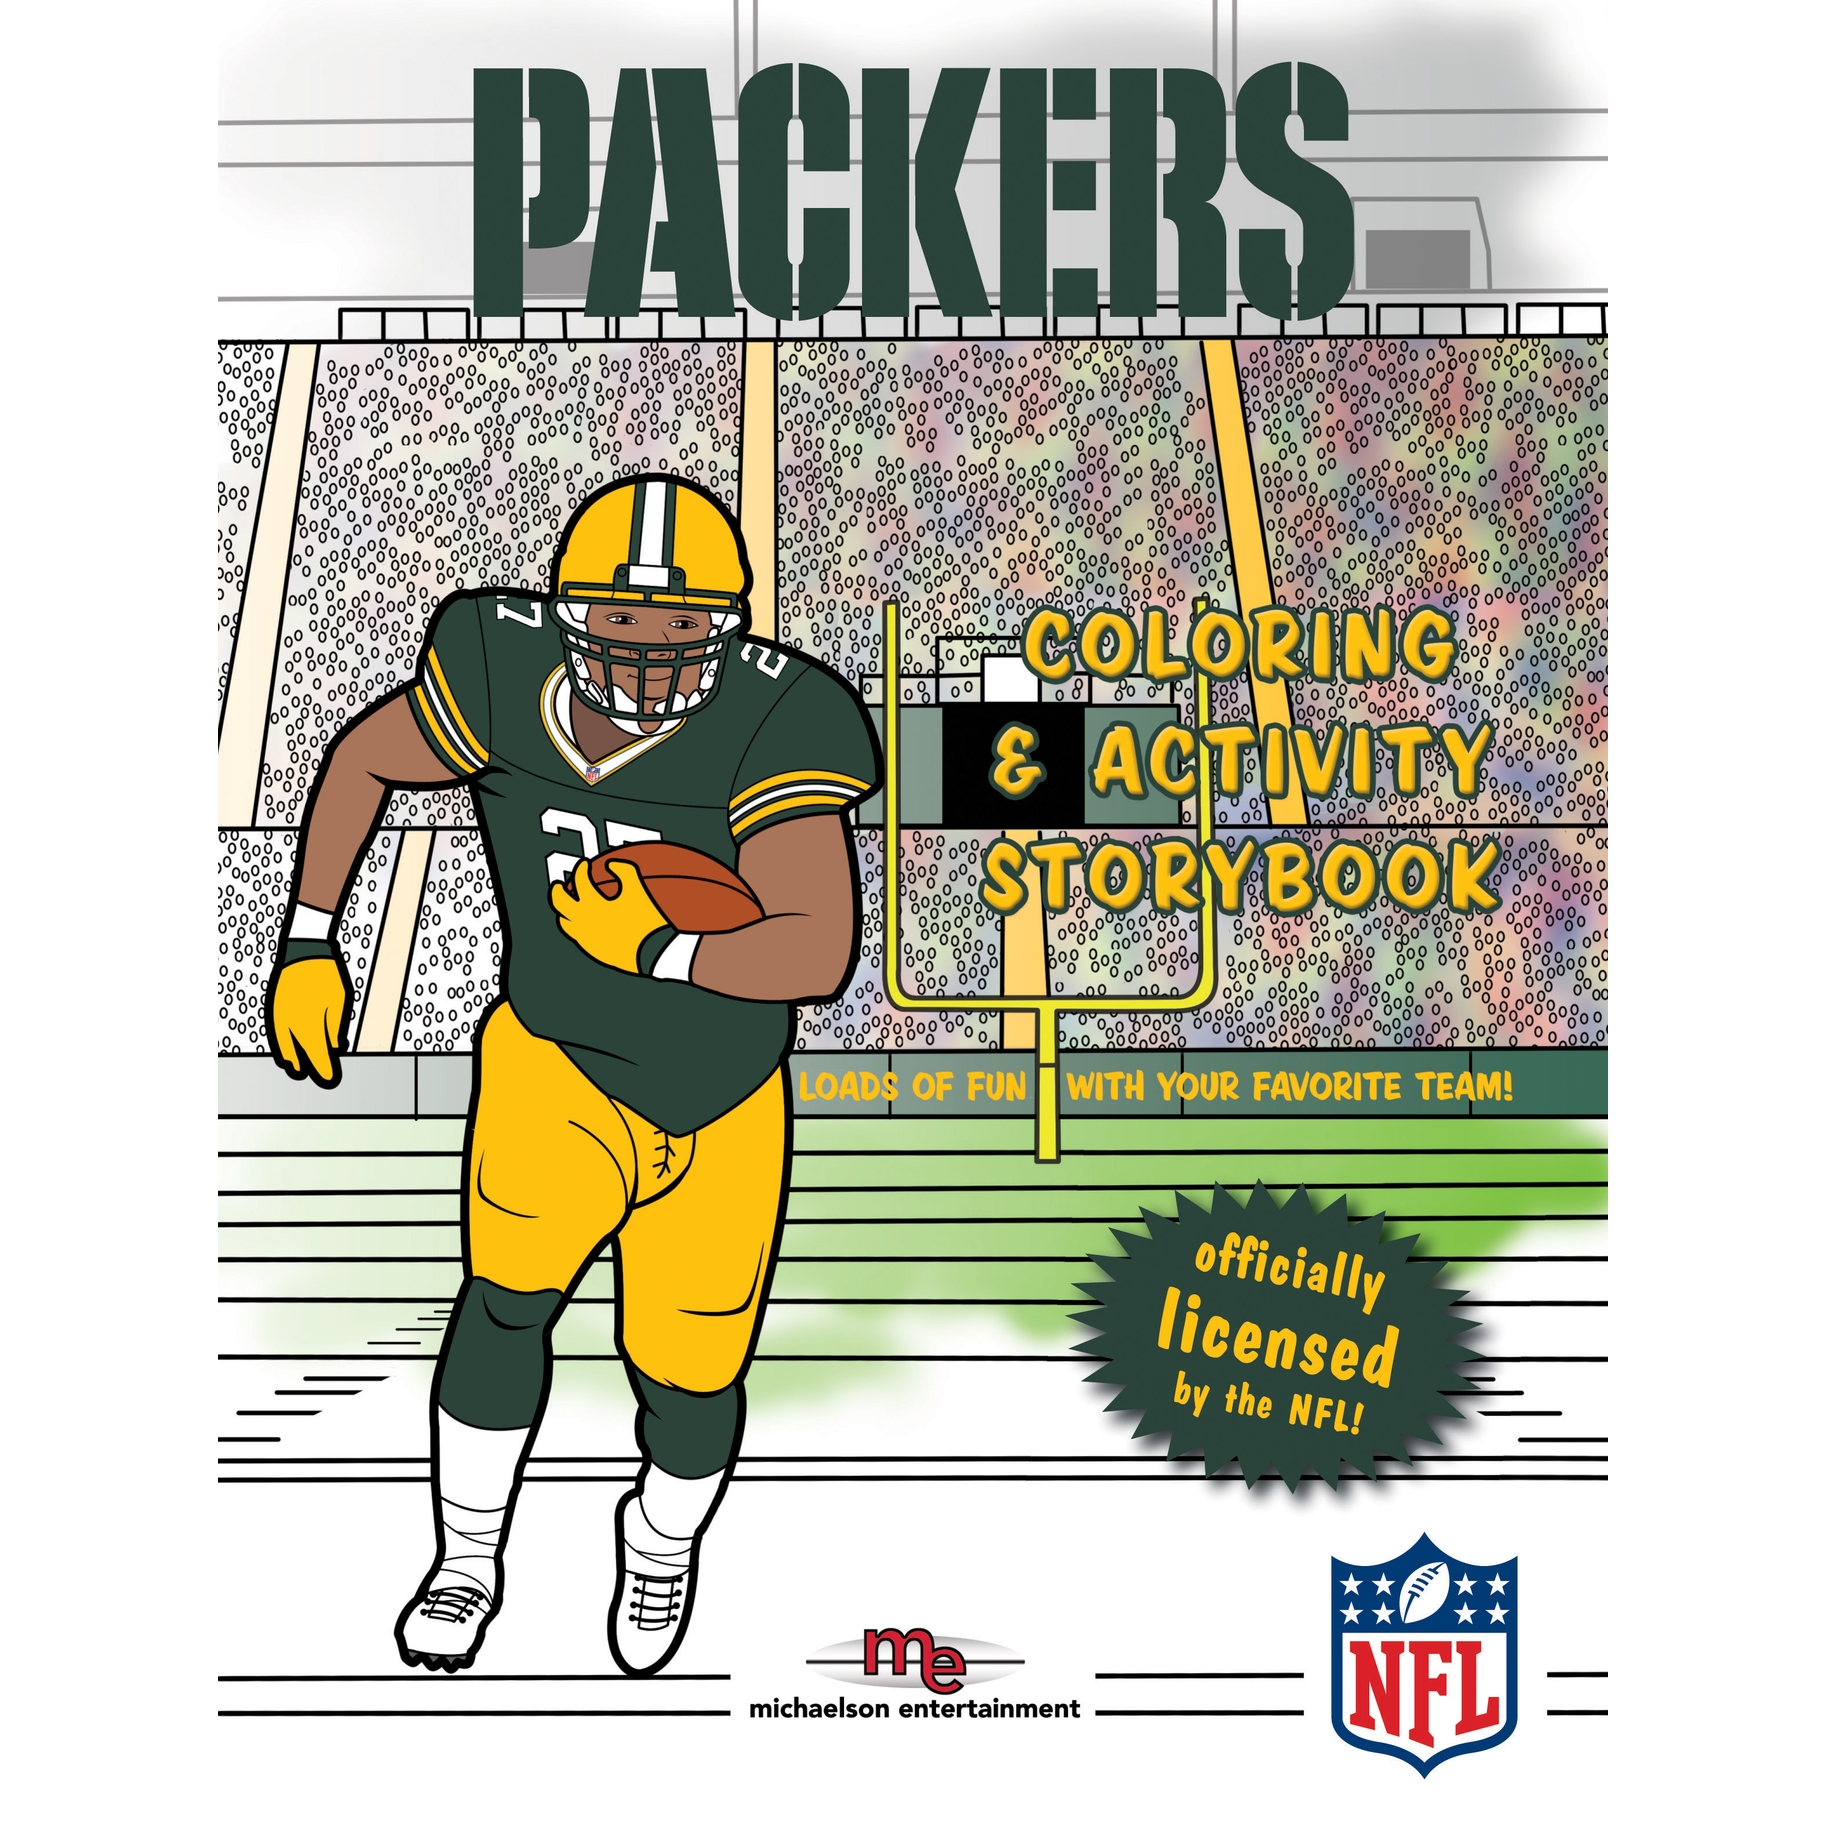 Green bay packers coloring activity book â urban milwaukee the store